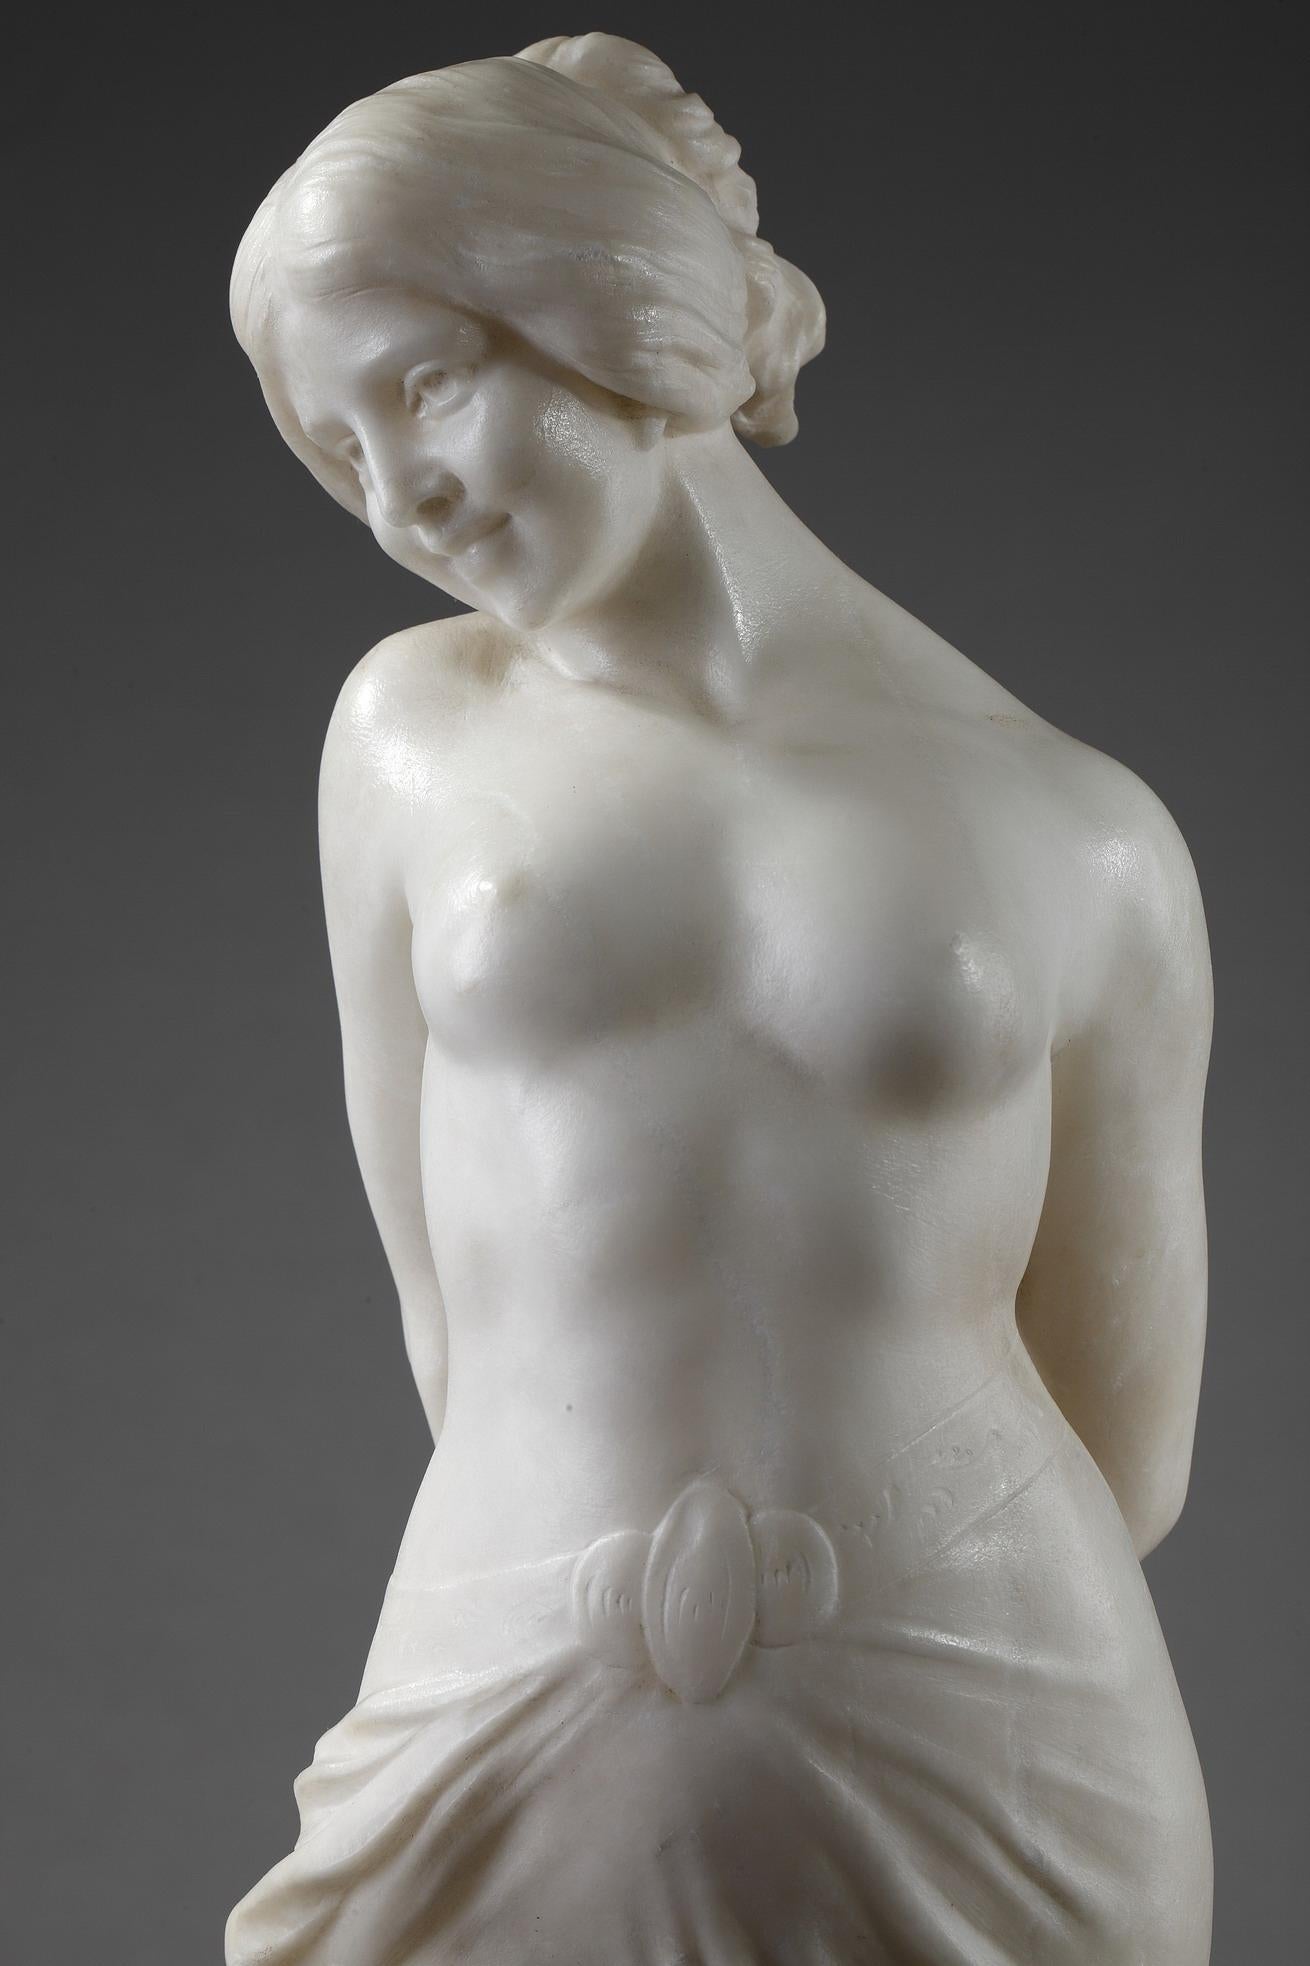 Art Nouveau Italian statue beautifully carved of alabaster. The charming nude woman is smiling. Her pose, with her hands gathered behind his back, accentuates her full feminine sensual curves. She rests on a small base and plinth. This alabaster